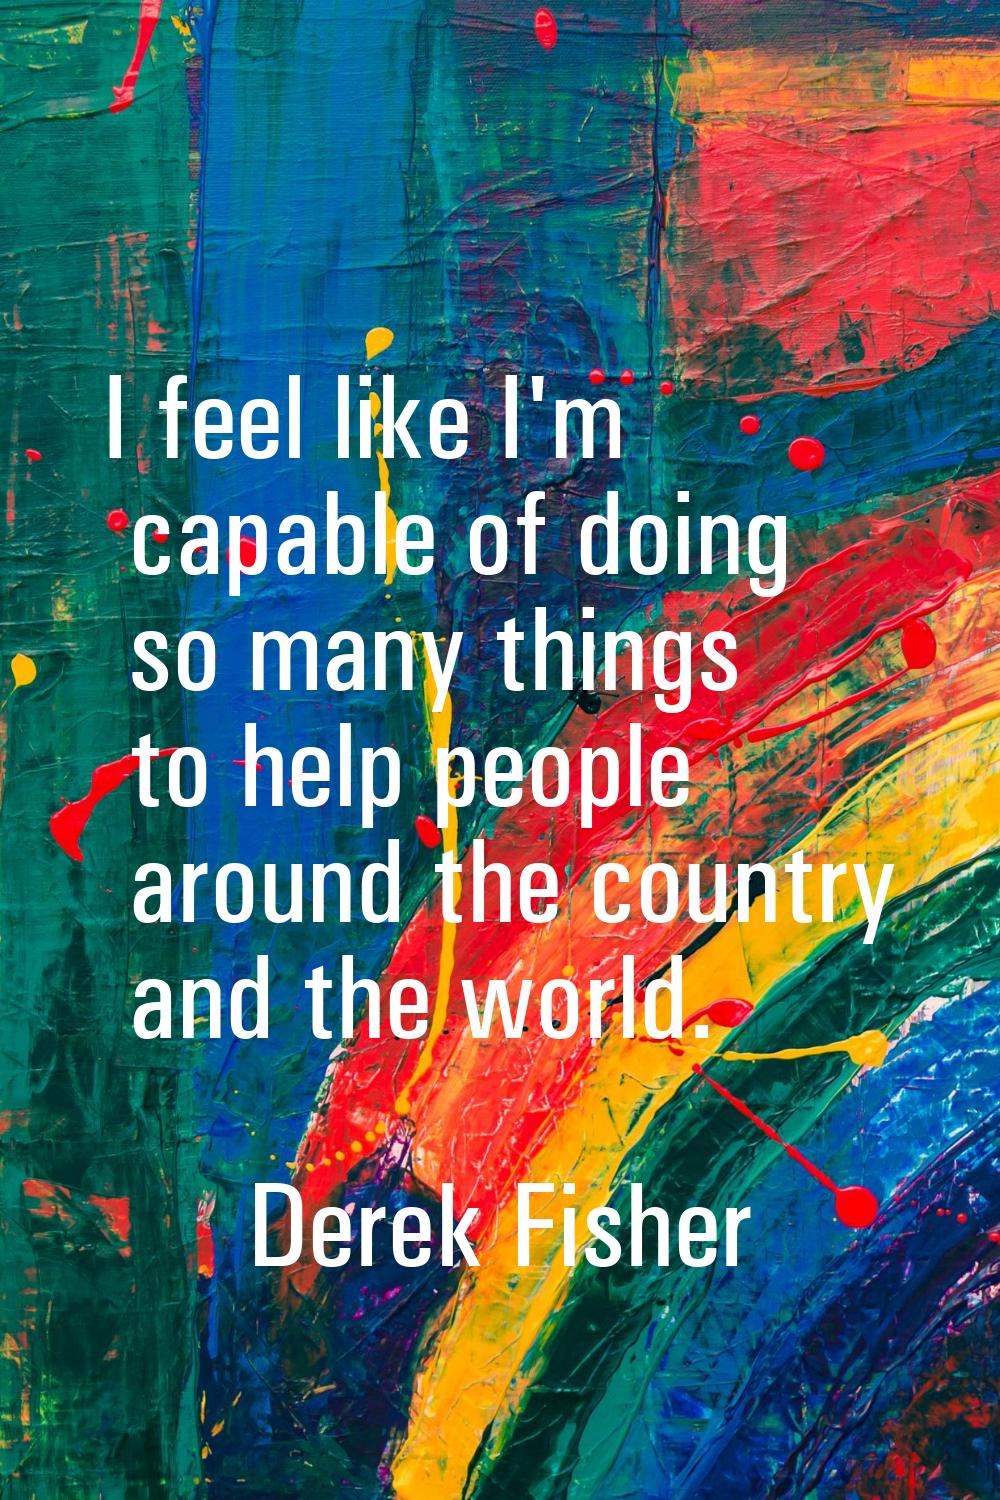 I feel like I'm capable of doing so many things to help people around the country and the world.